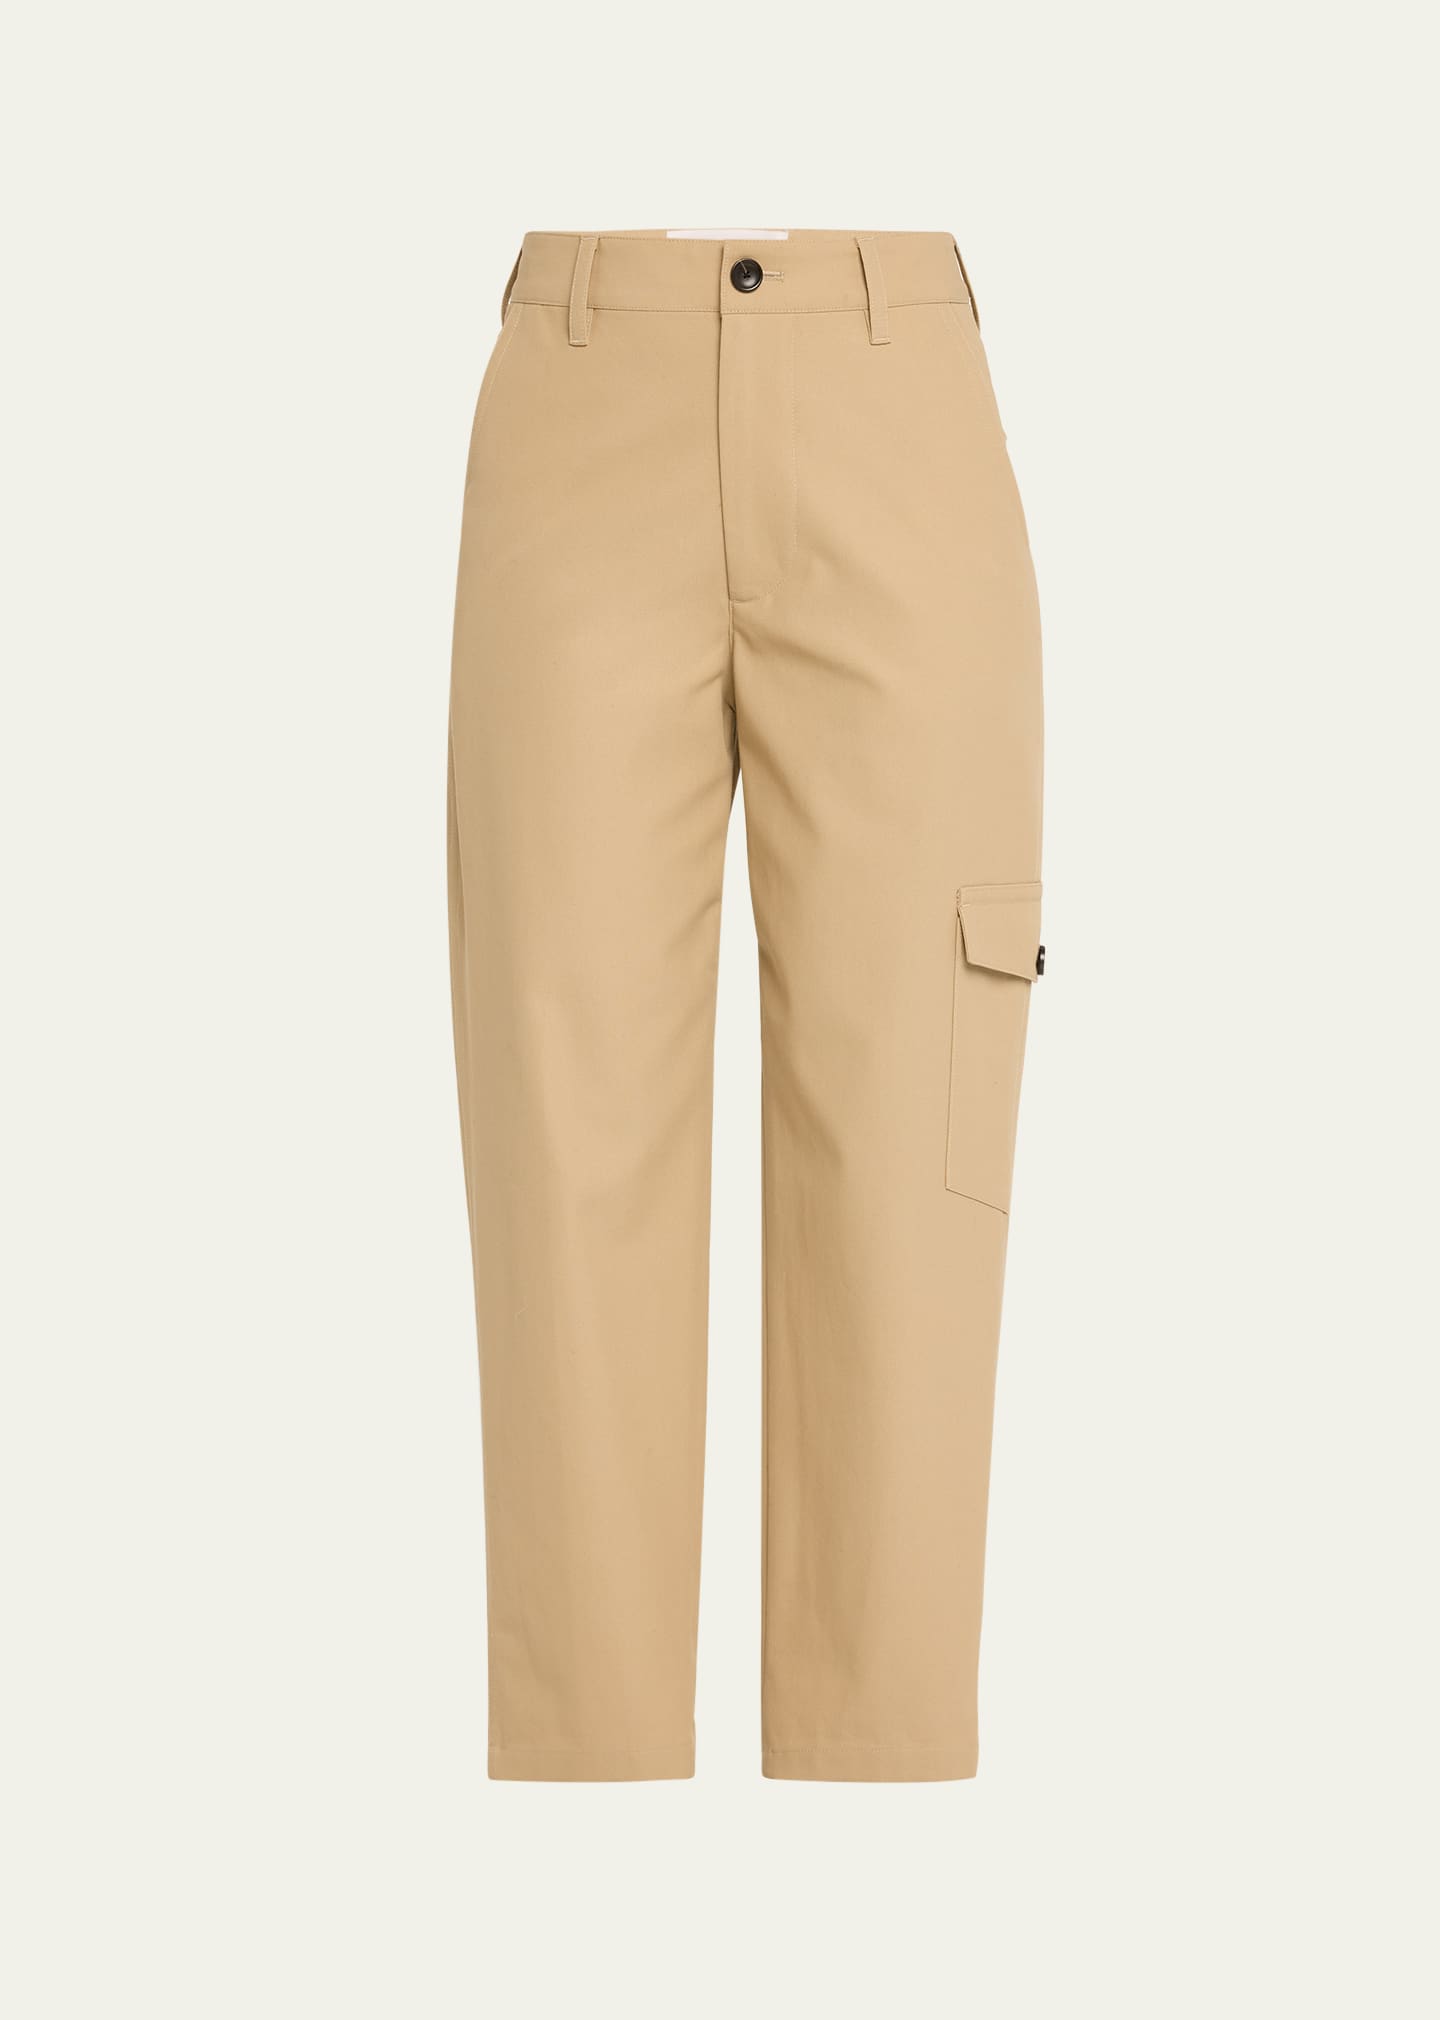 Maria Mcmanus Cropped Cargo Pants In Sand